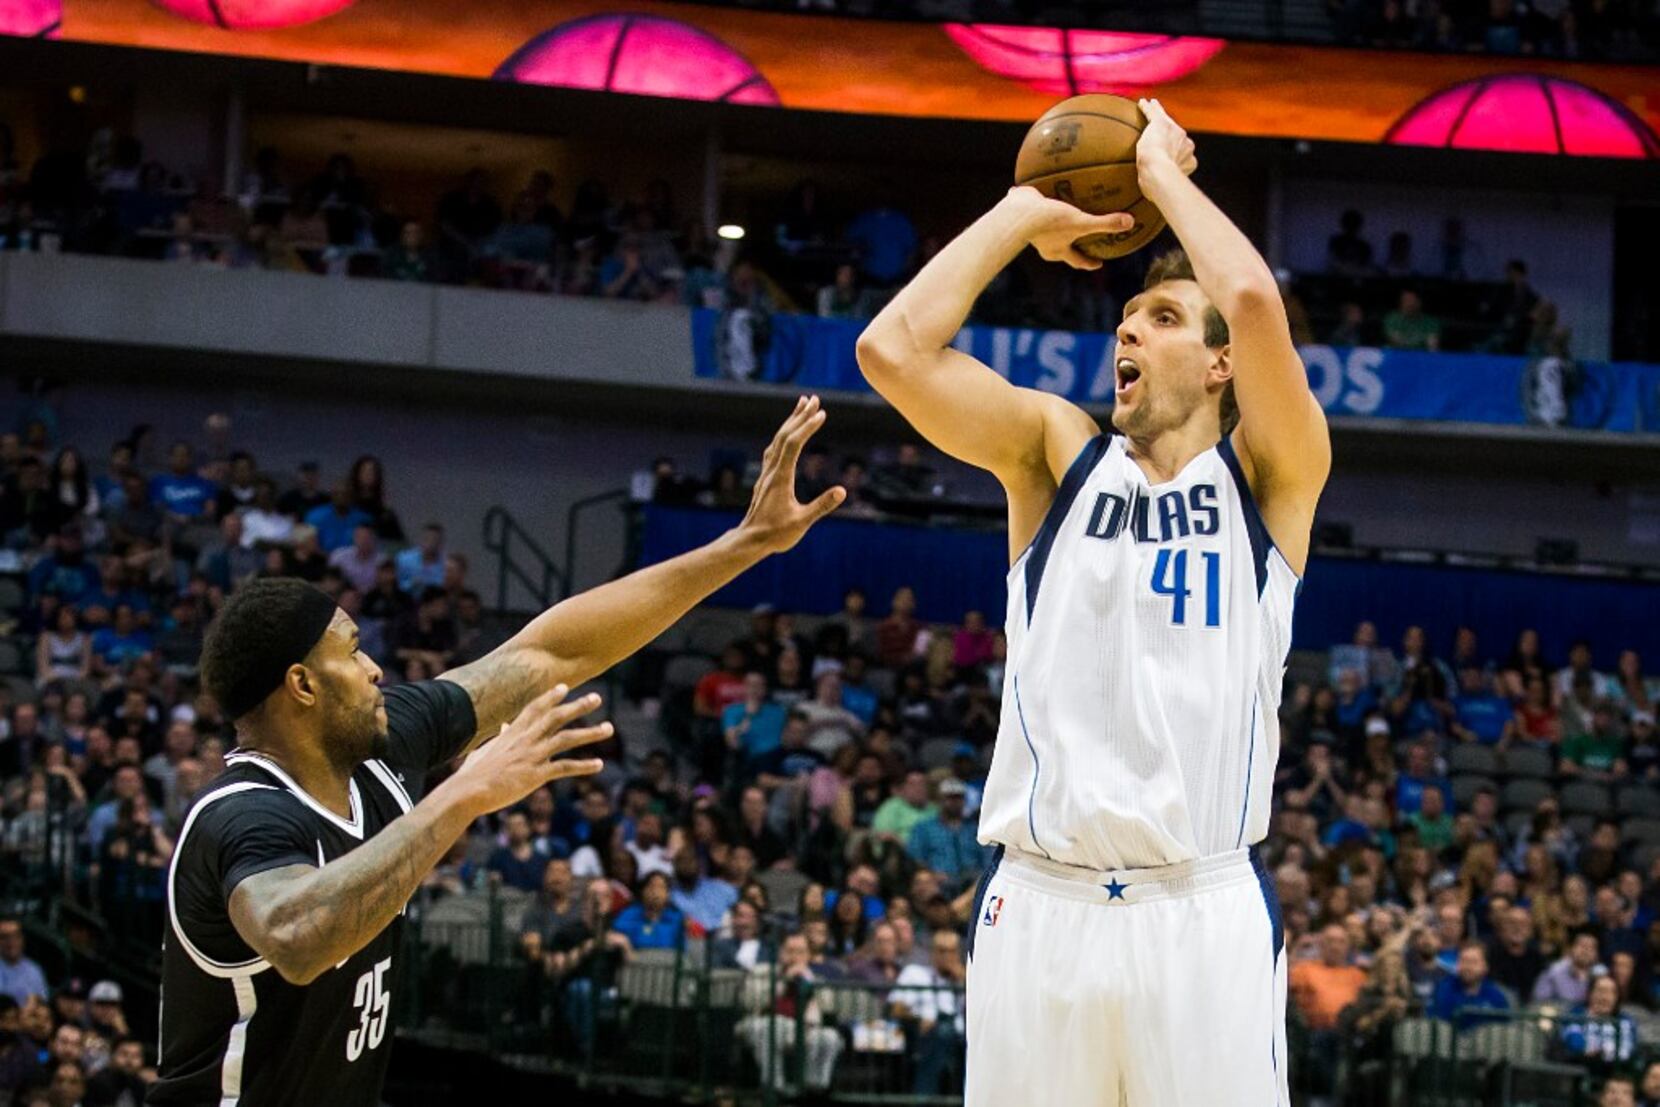 Where Does Dirk Nowitzki Fit Among the Greatest European Players